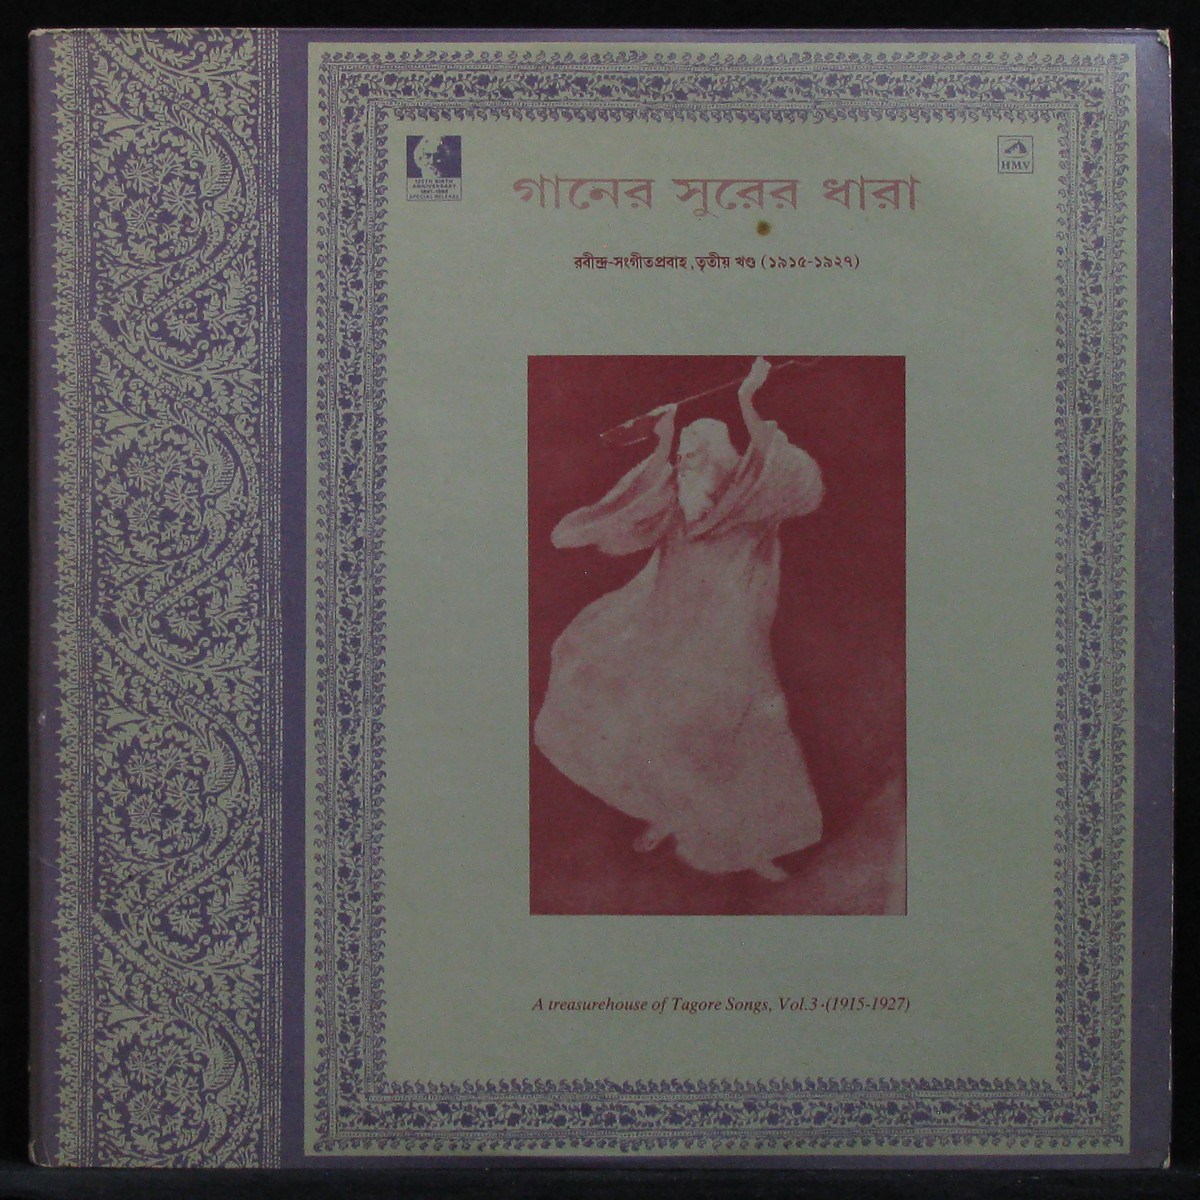 A Treasurehouse Of Tagore Songs, Vol. 3 (1915-1927)